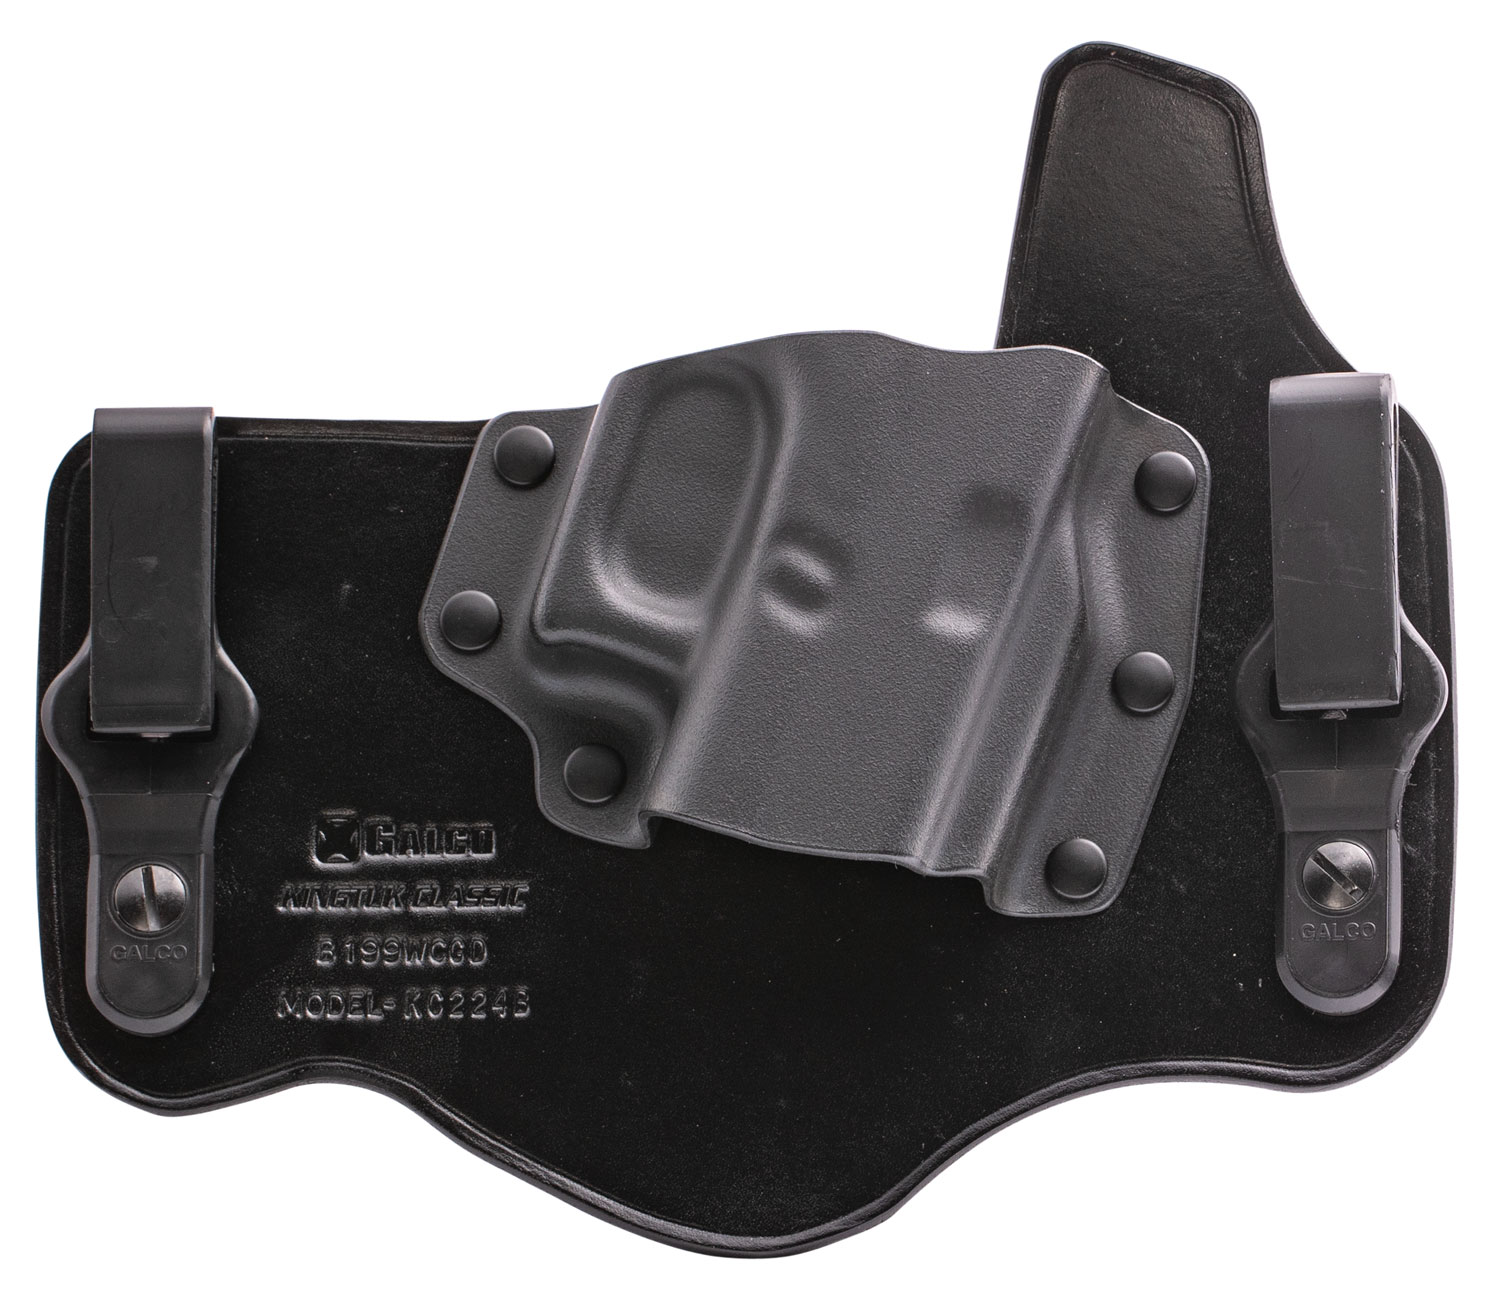 Galco KC224B KingTuk Classic Black Kydex Holster w/Leather Backing IWB fits Glock 17 Right Hand